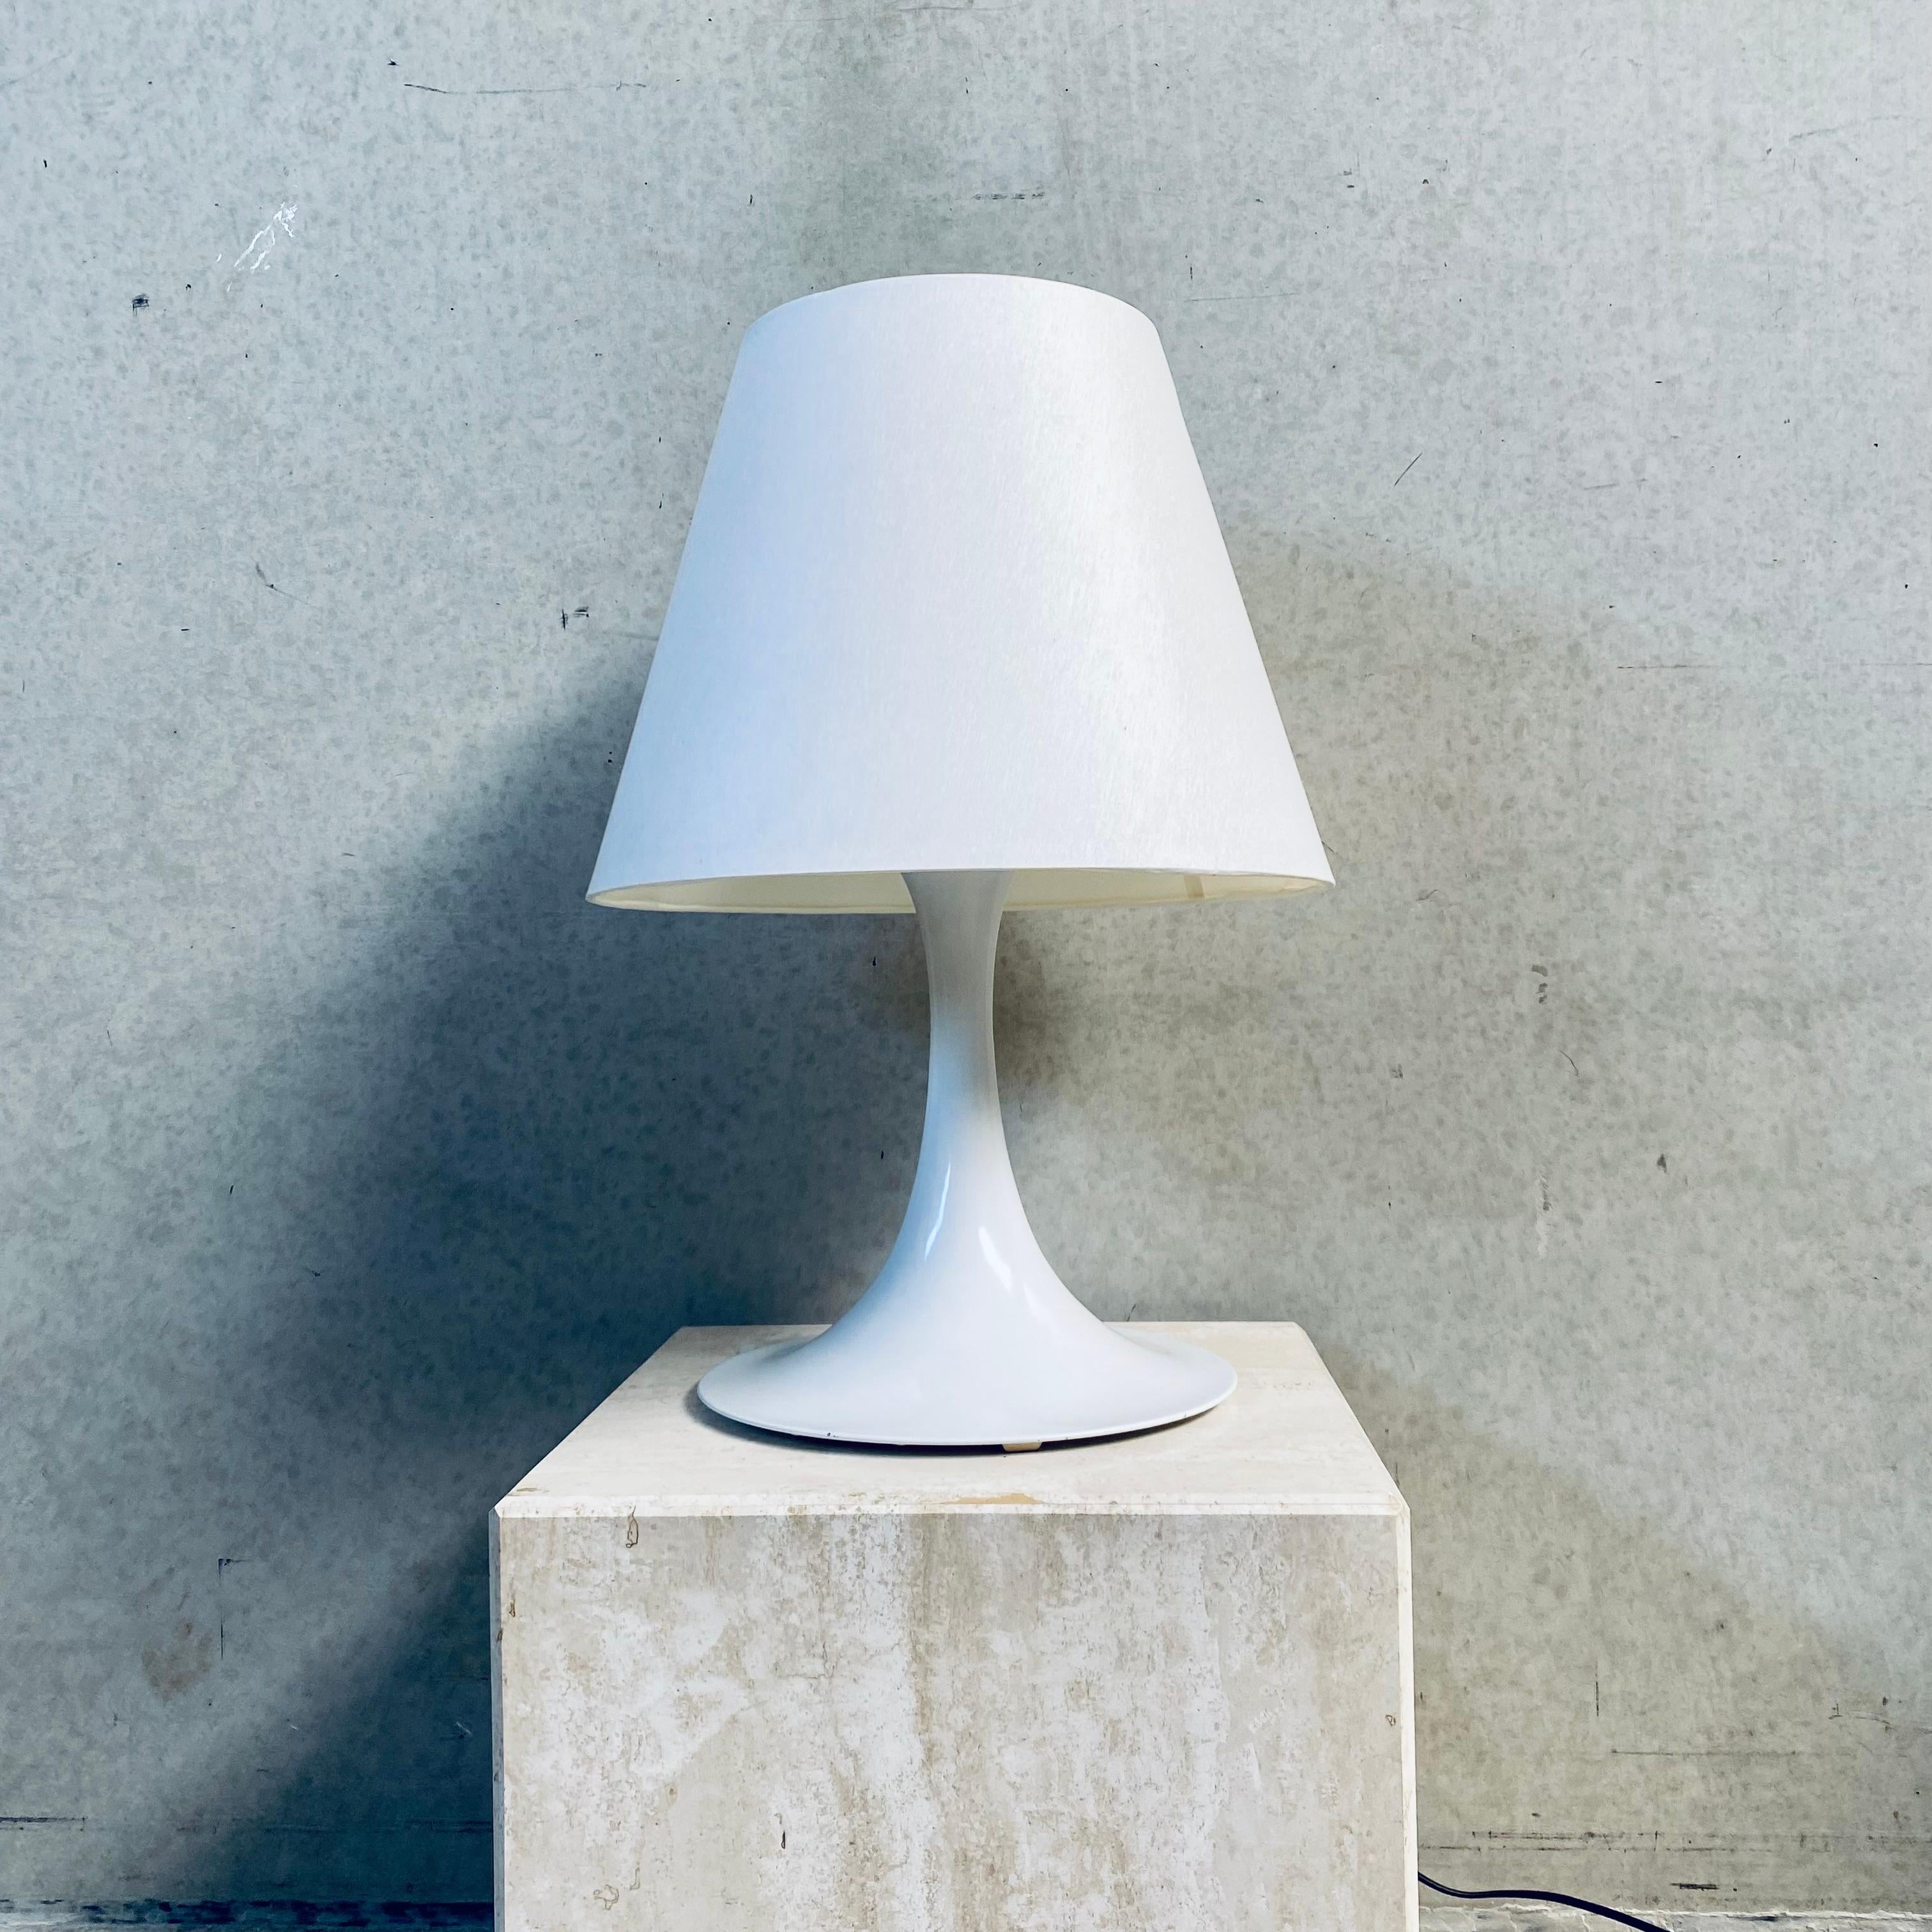 Elegant Mid-Century White Table Lamp by RAAK Amsterdam

Description: Elevate your space with the timeless charm of the Mid-Century White Table Lamp, model D2128, meticulously crafted by RAAK Amsterdam. This exquisite piece from the 1960s embodies